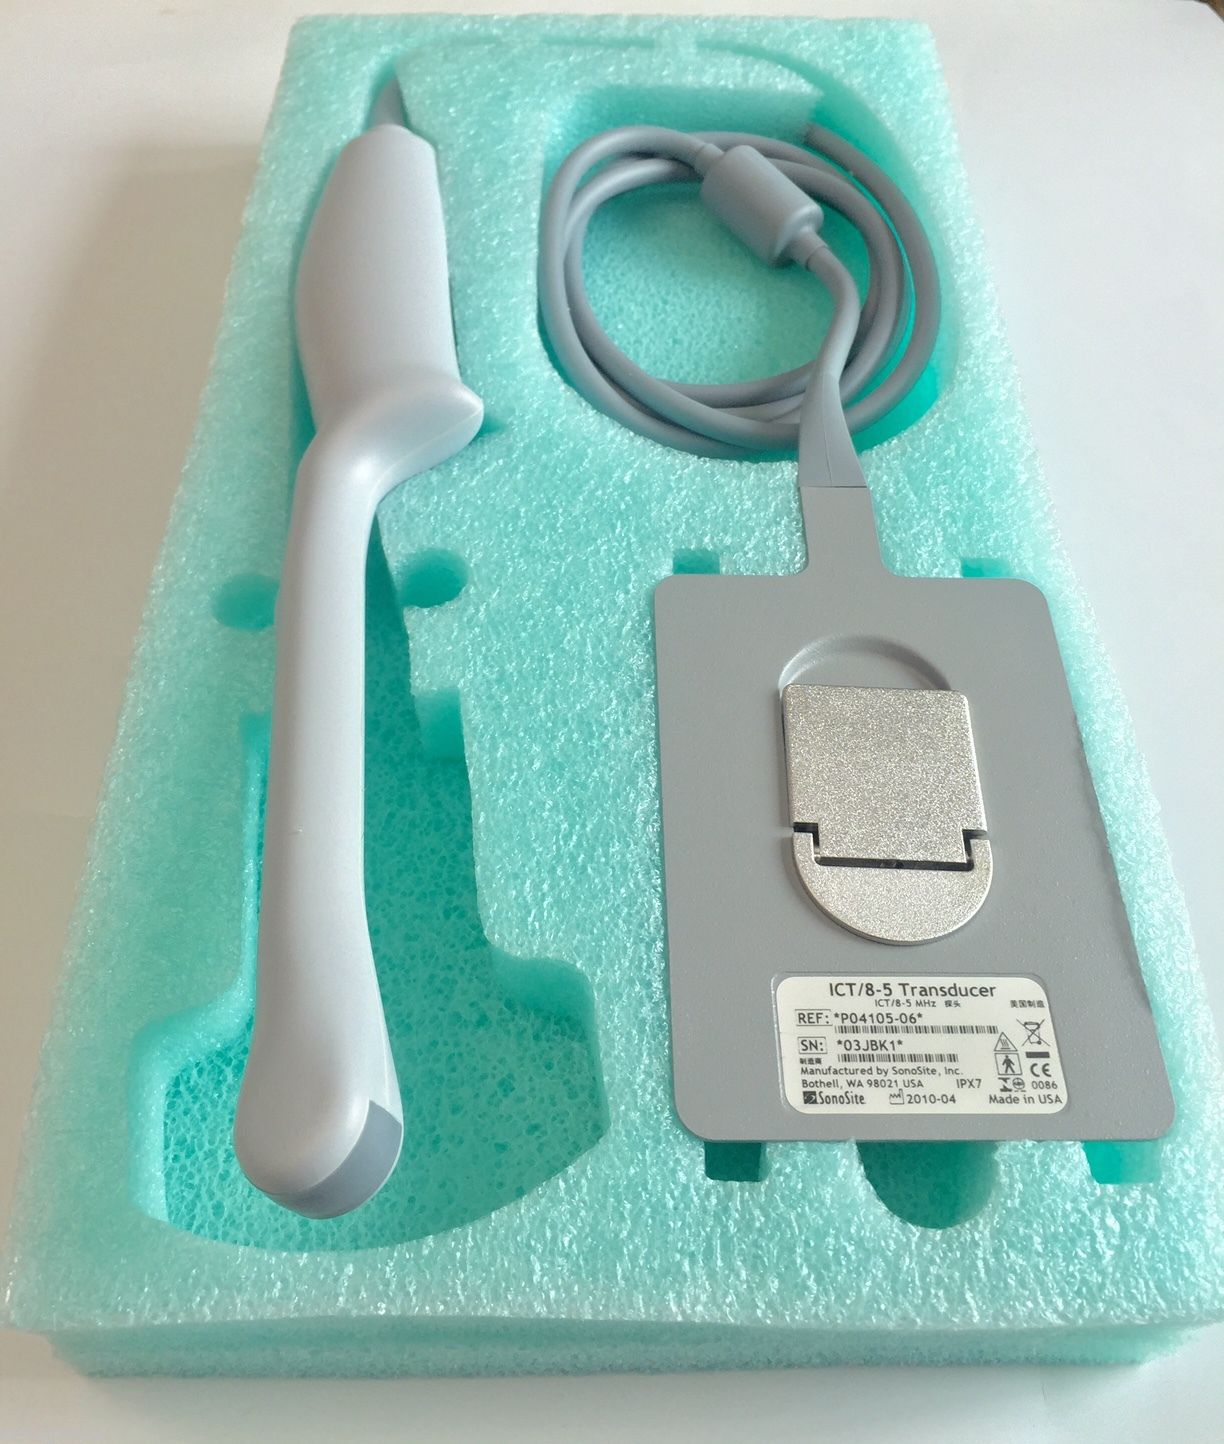 SonoSite ICT/8-5 MHz.Gynecology,Obstetric ULTRASOUND PROBE " NEW "REF# P04105-06 DIAGNOSTIC ULTRASOUND MACHINES FOR SALE